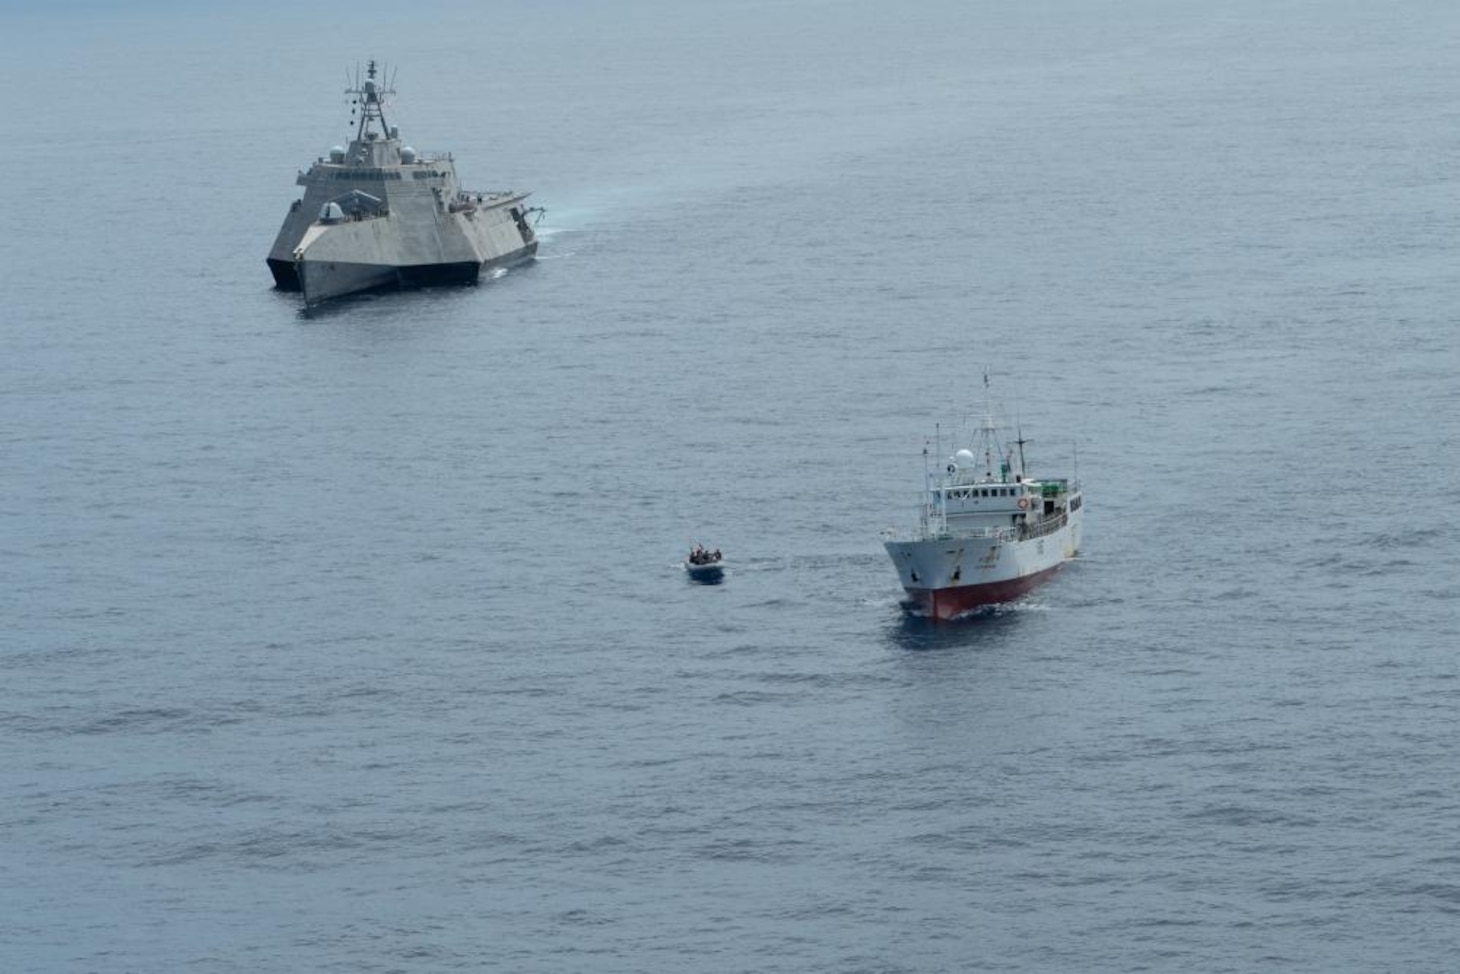 Independence-variant littoral combat ship USS Oakland (LCS 24) stations behind a fishing vessel while Tactical Law Enforcement Team Pacific Coast Guardsmen conduct an Oceania Maritime Support Initiative (OMSI) vessel compliance boarding, Aug. 19, 2022.